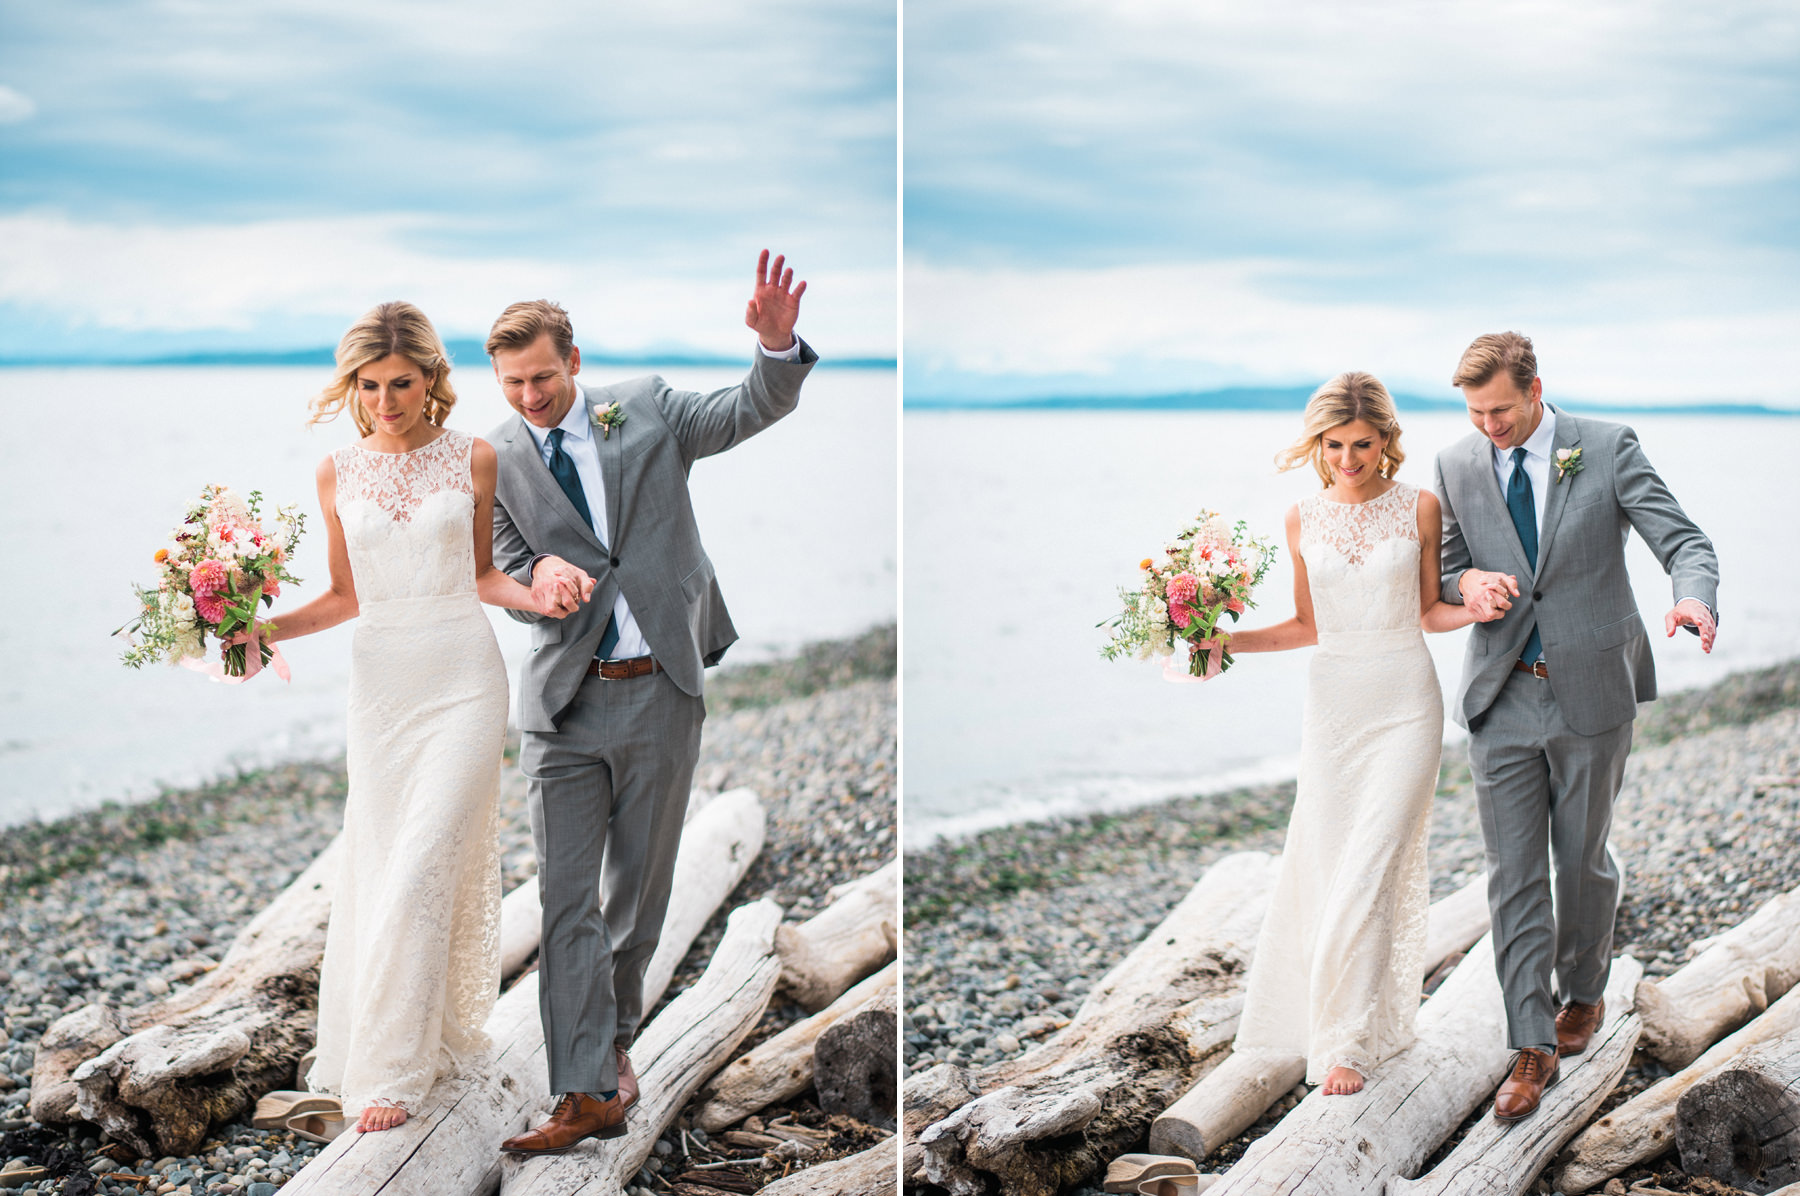 180-wedding-couple-walking-on-driftwood-holding-flowers-by-floret-floral.jpg